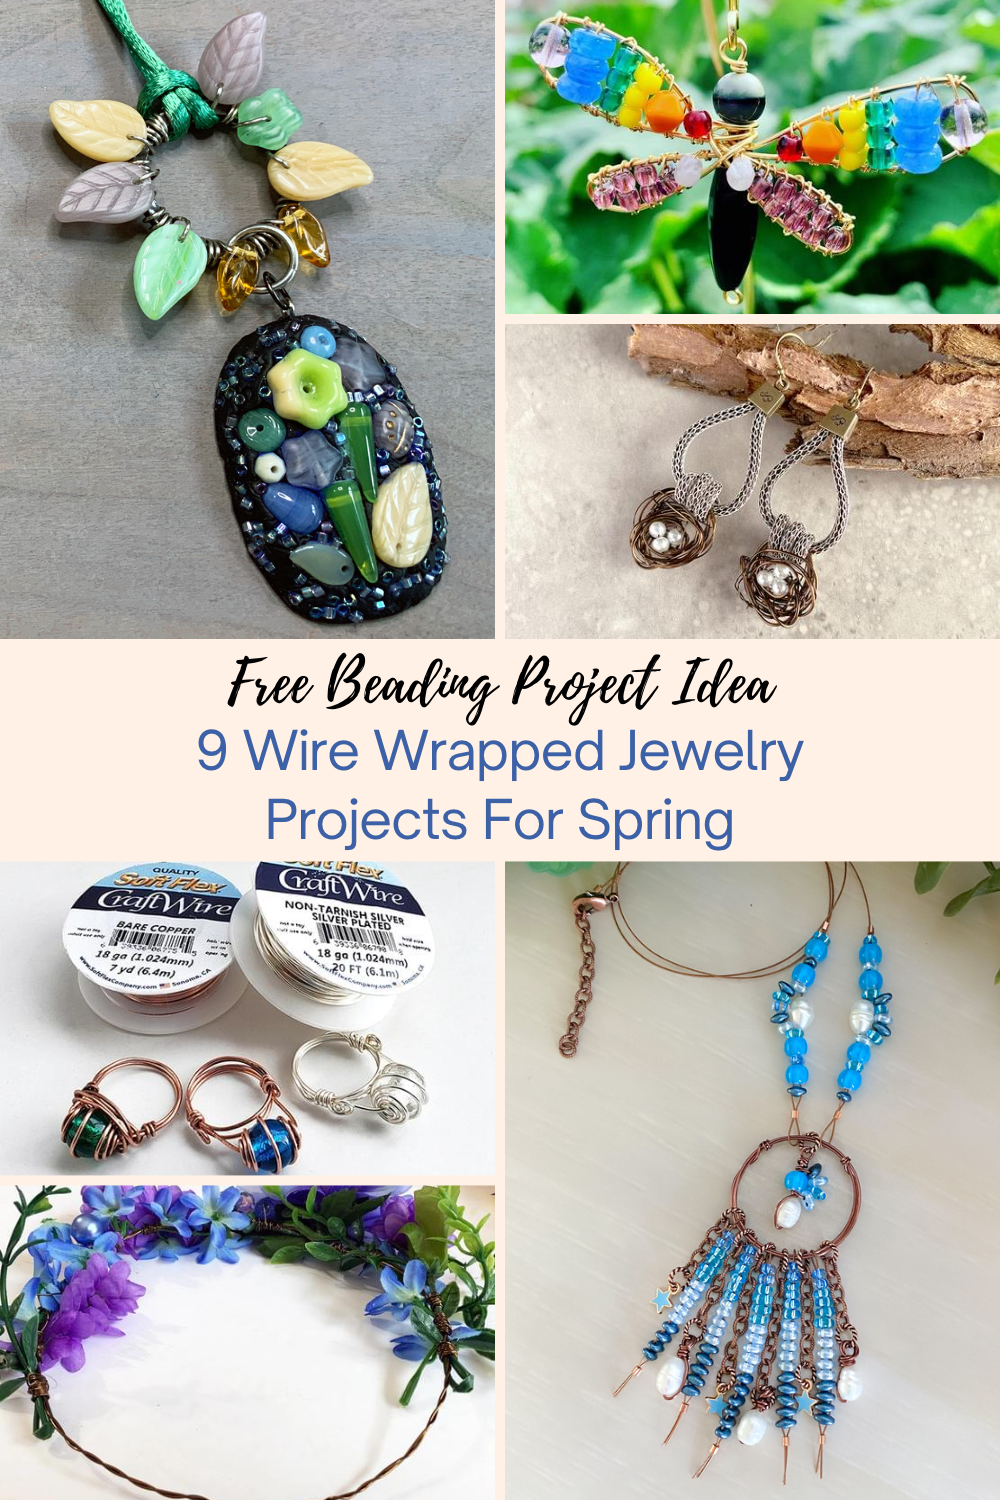 How to Wire Wrap a Flower Crown with Soft Flex Craft Wire: Free